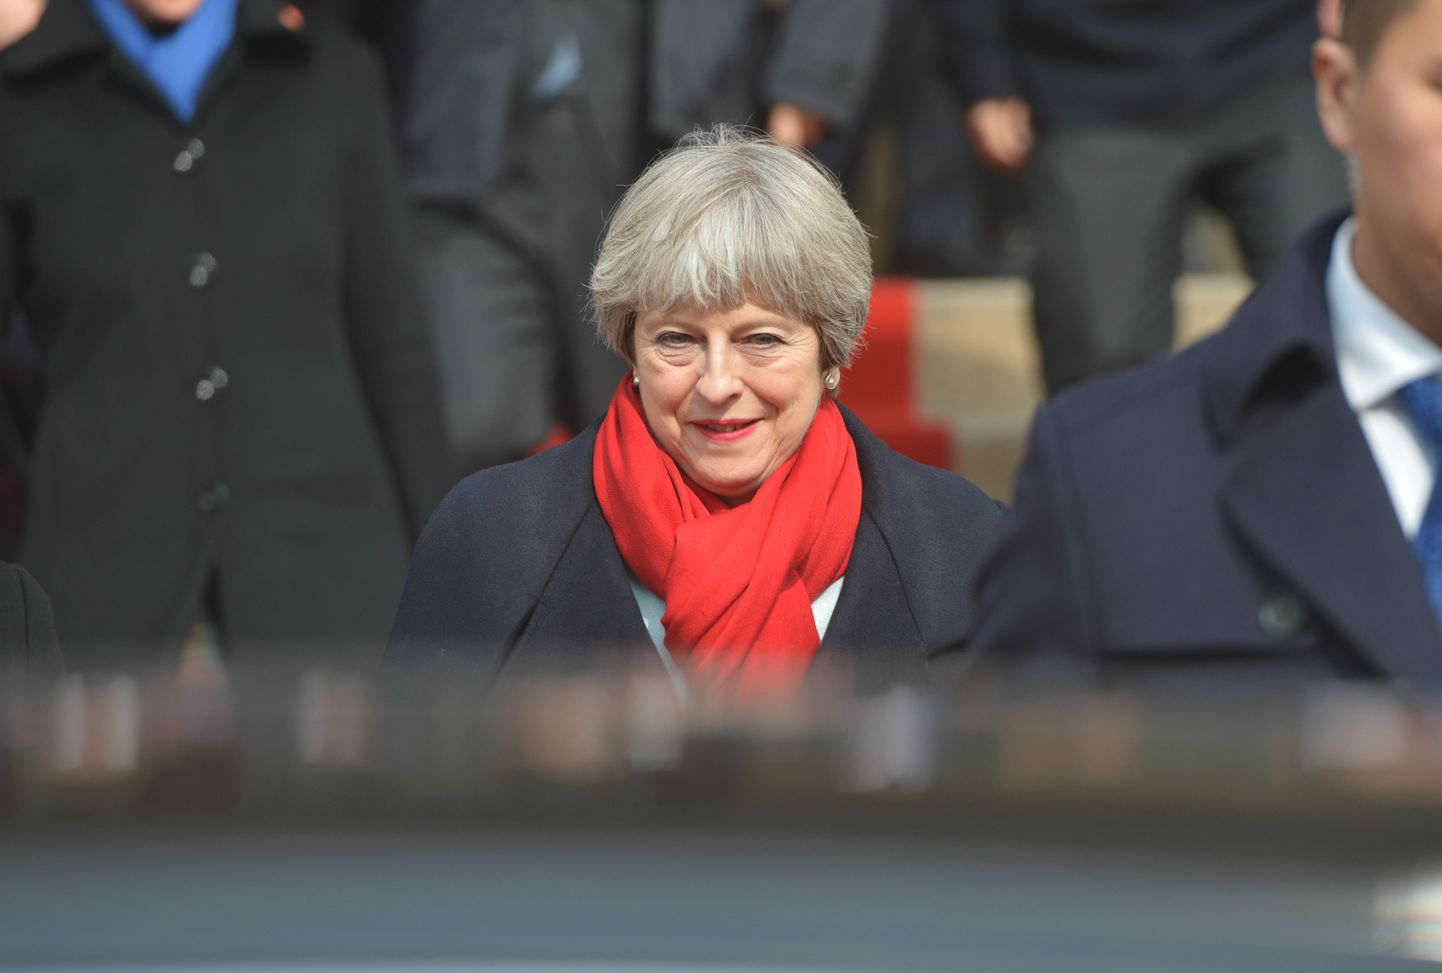 British Prime Minister Theresa May (C) attends an event in Wuhan in China's central Hubei province on January 31, 2018. 
British Prime Minister Theresa May began a visit to China on January 31, as she tries to strengthen her country's global trade links before its contentious divorce with the European Union. / AFP PHOTO / - / China OUT